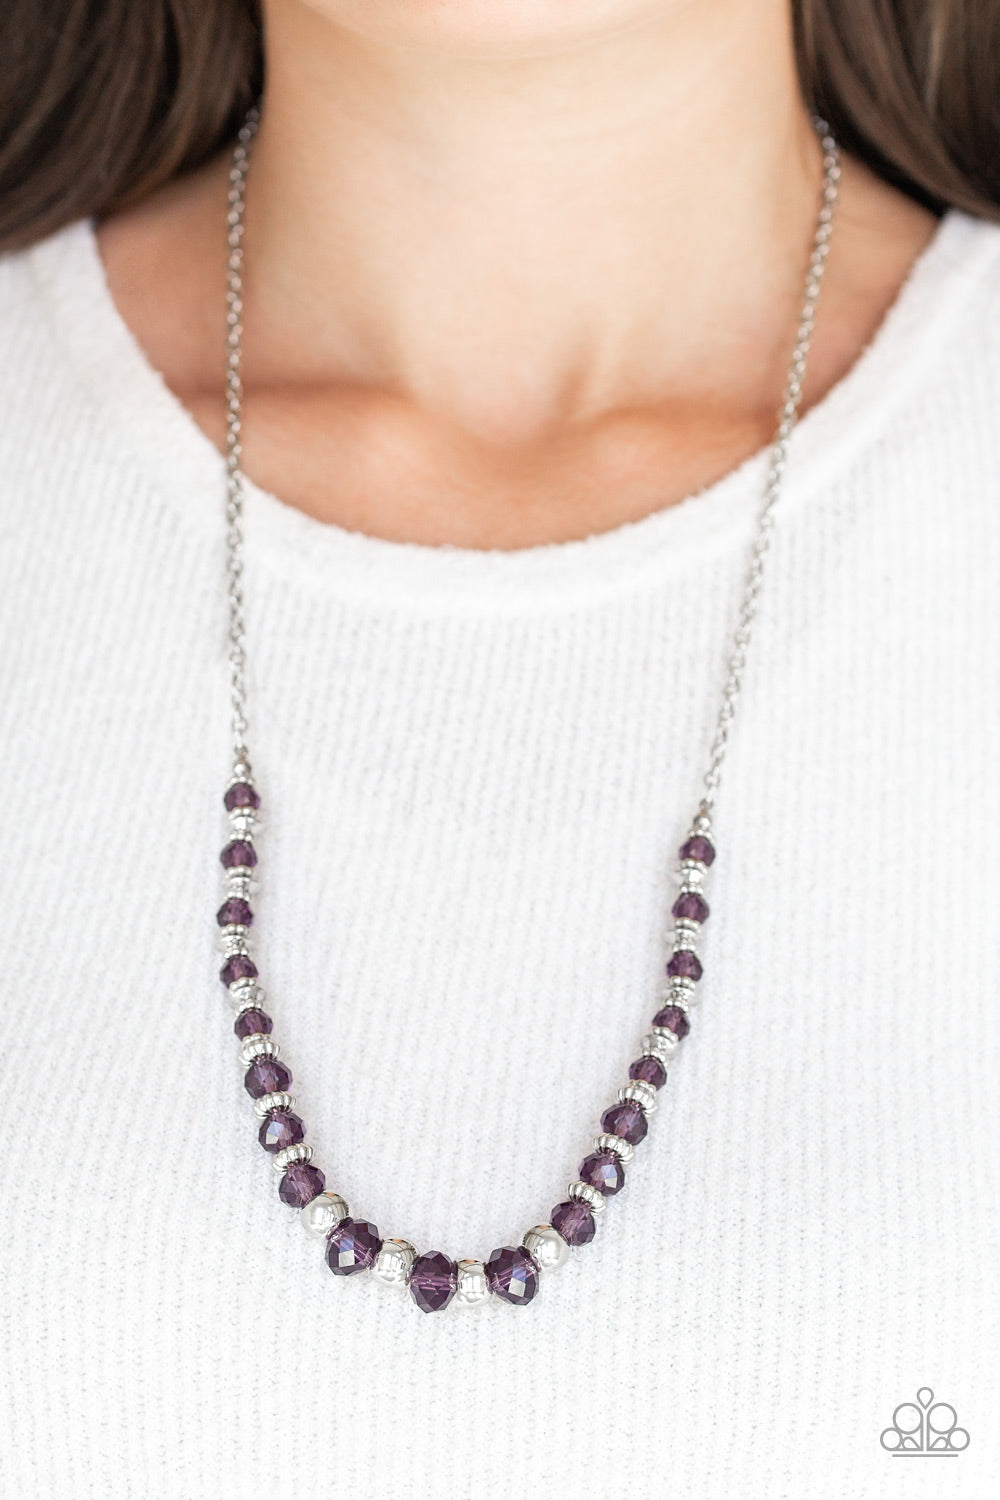 Stratosphere Sparkle- Purple and Silver Necklace- Paparazzi Accessories